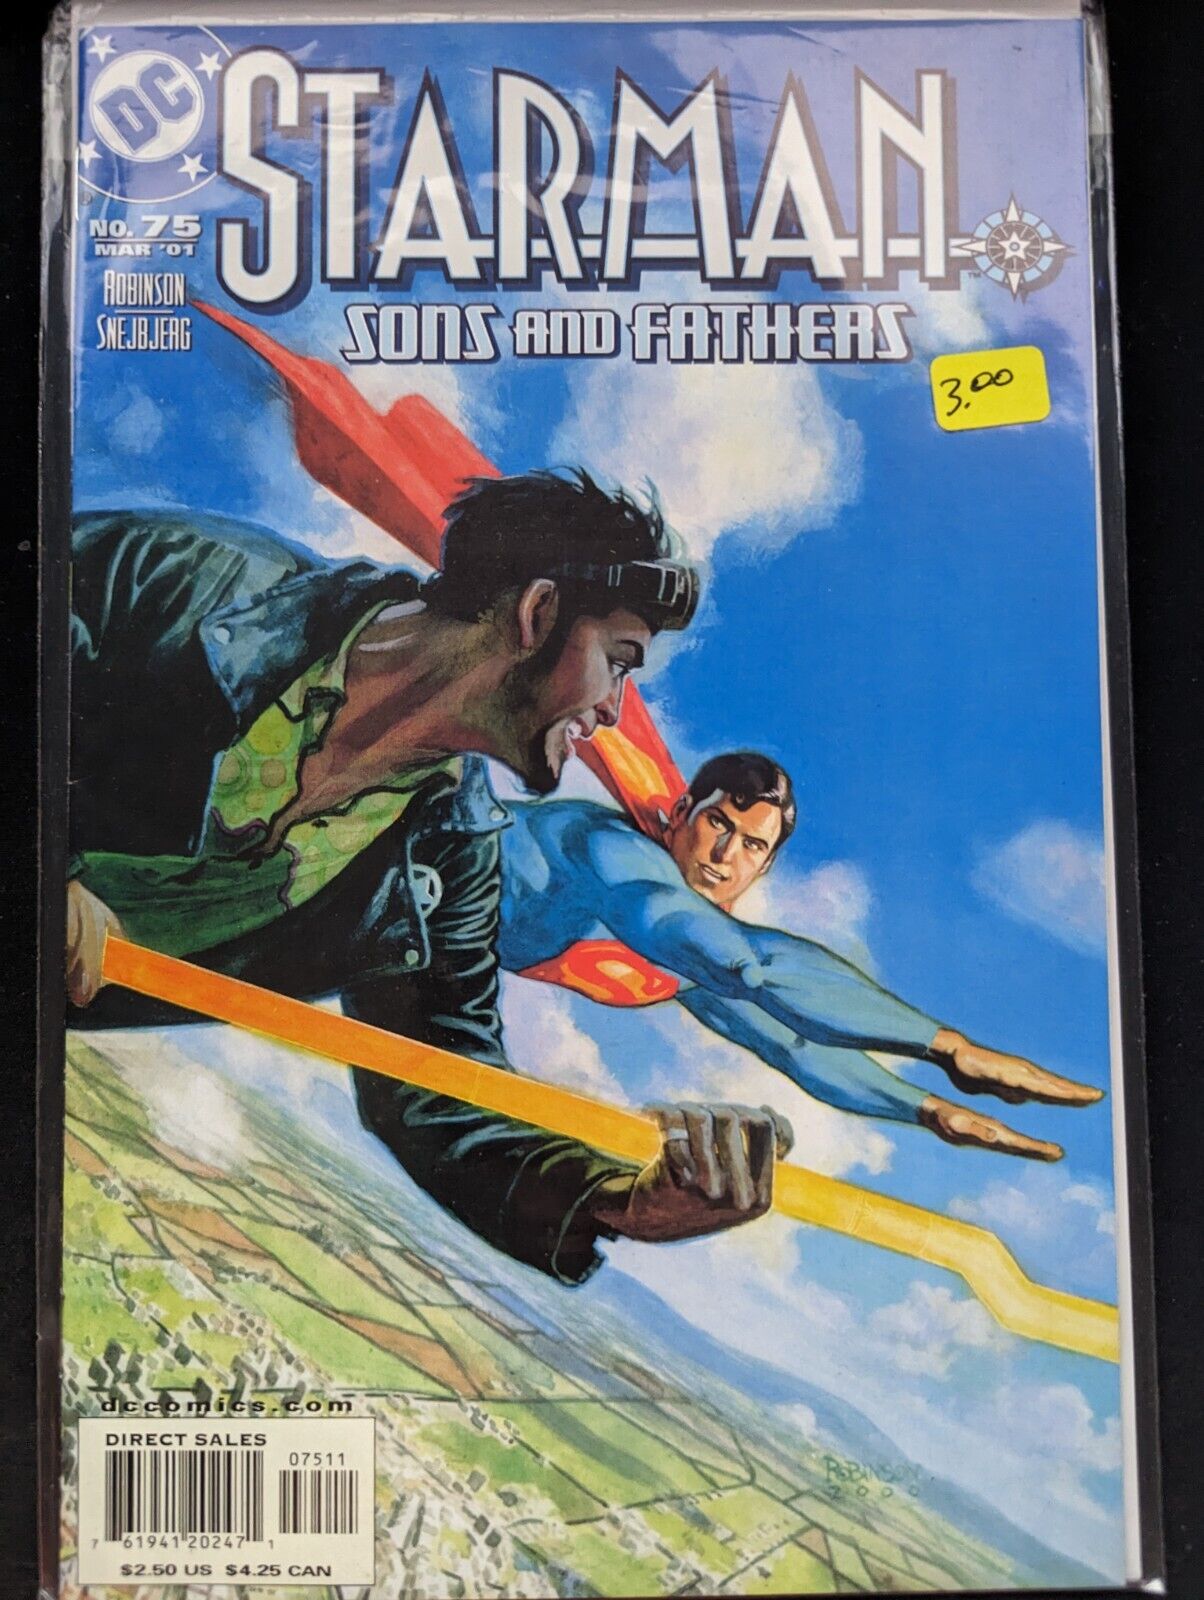 Starman #75 (Mar 2001) - Sons and Fathers, NM/M